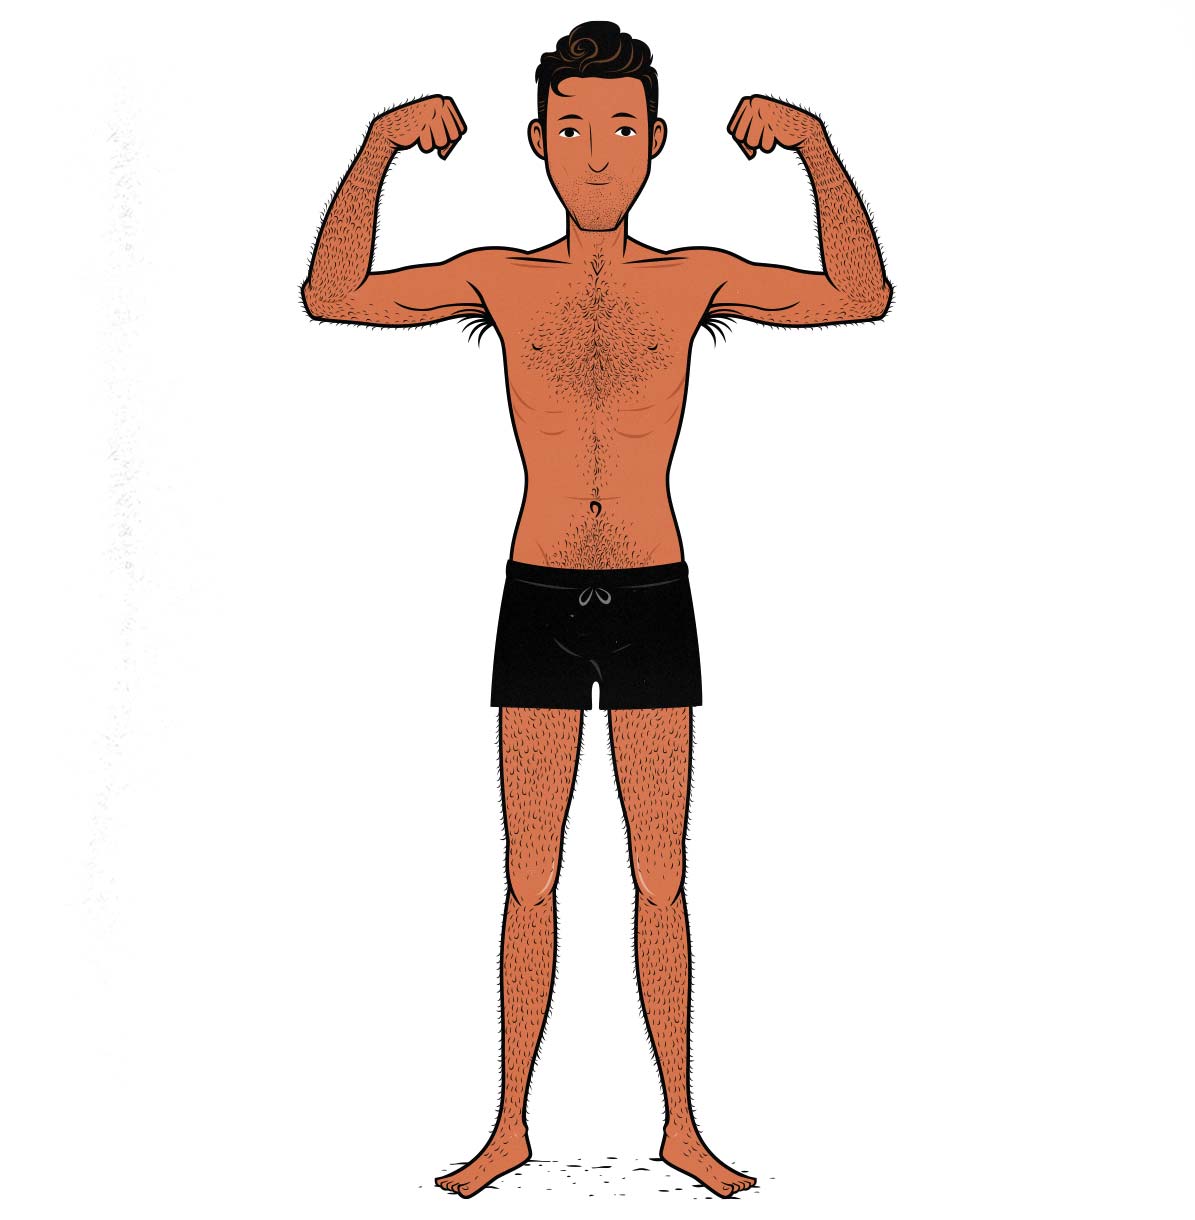 An illustration of the ectomorph body type, showing a skinny man flexing his muscles. Illustrated by Shane Duquette.